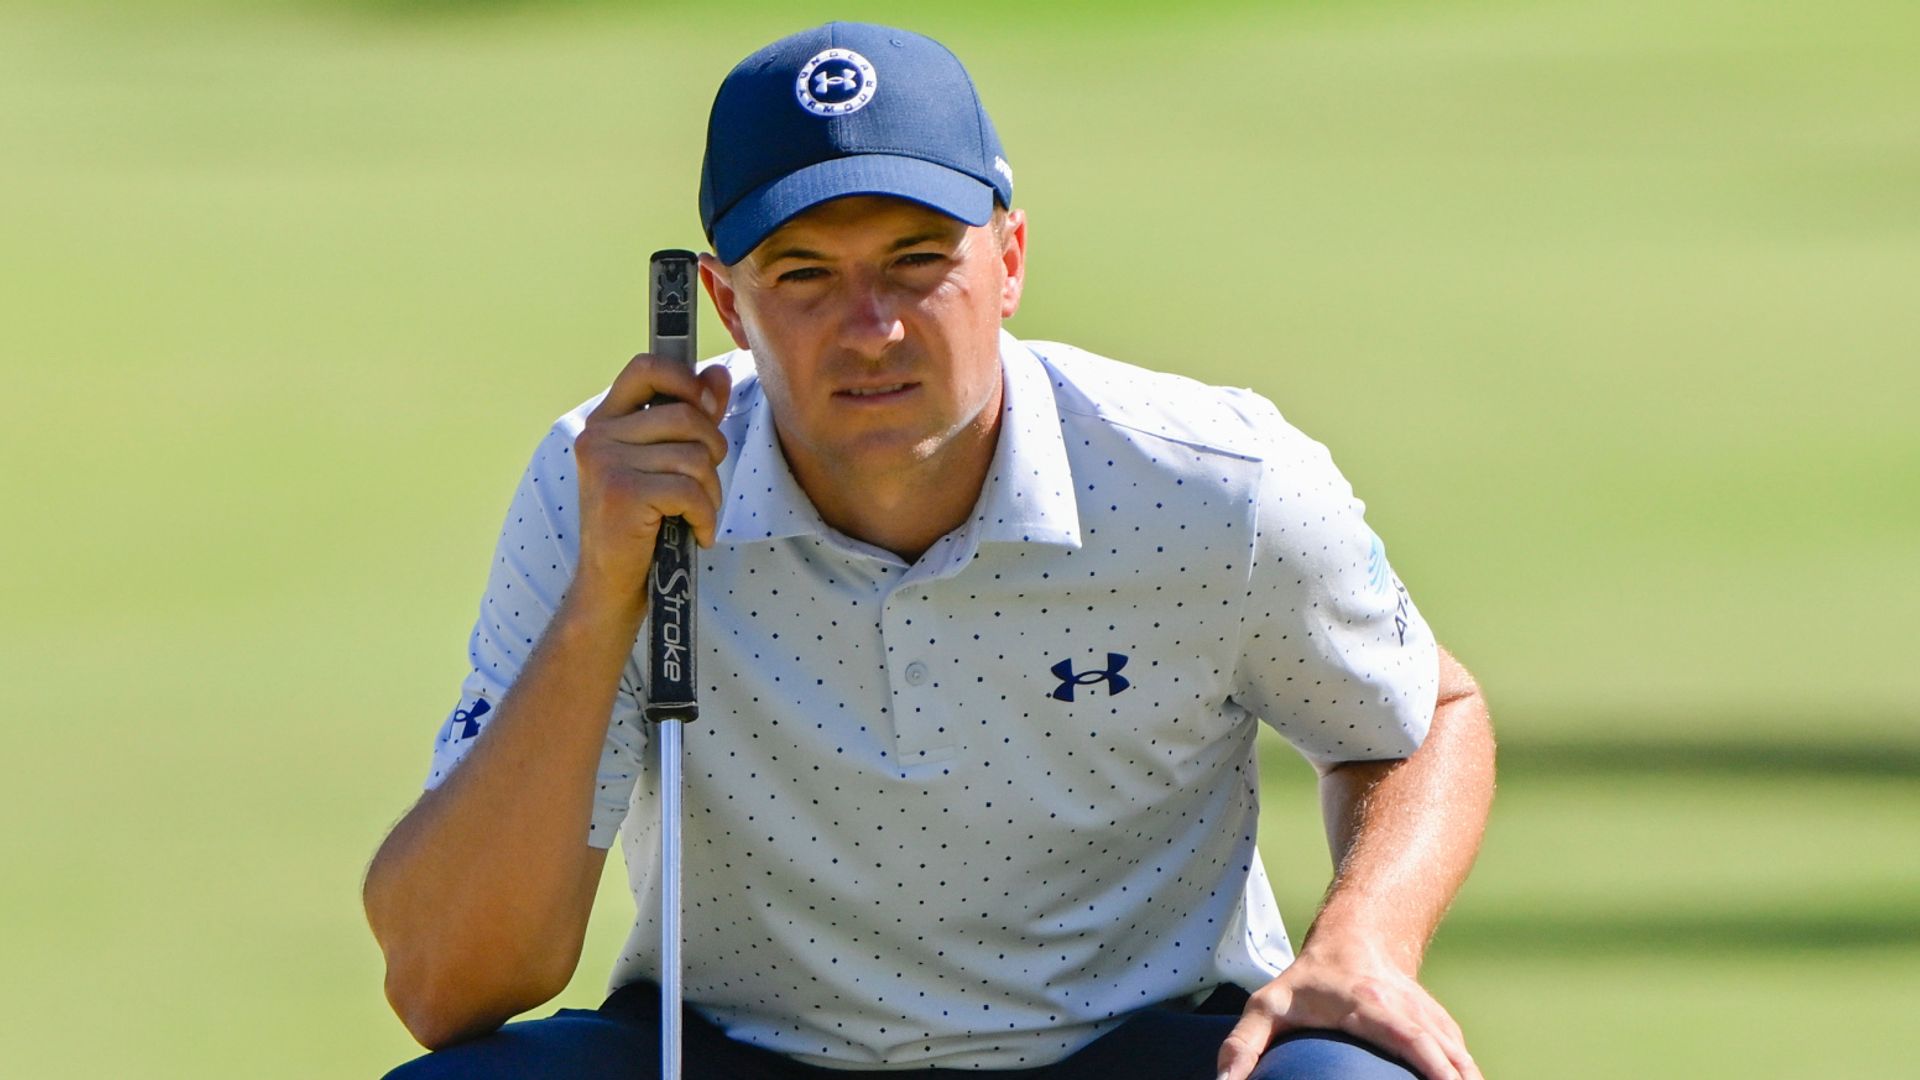 Spieth misses cut at Sony Open after round two collapse